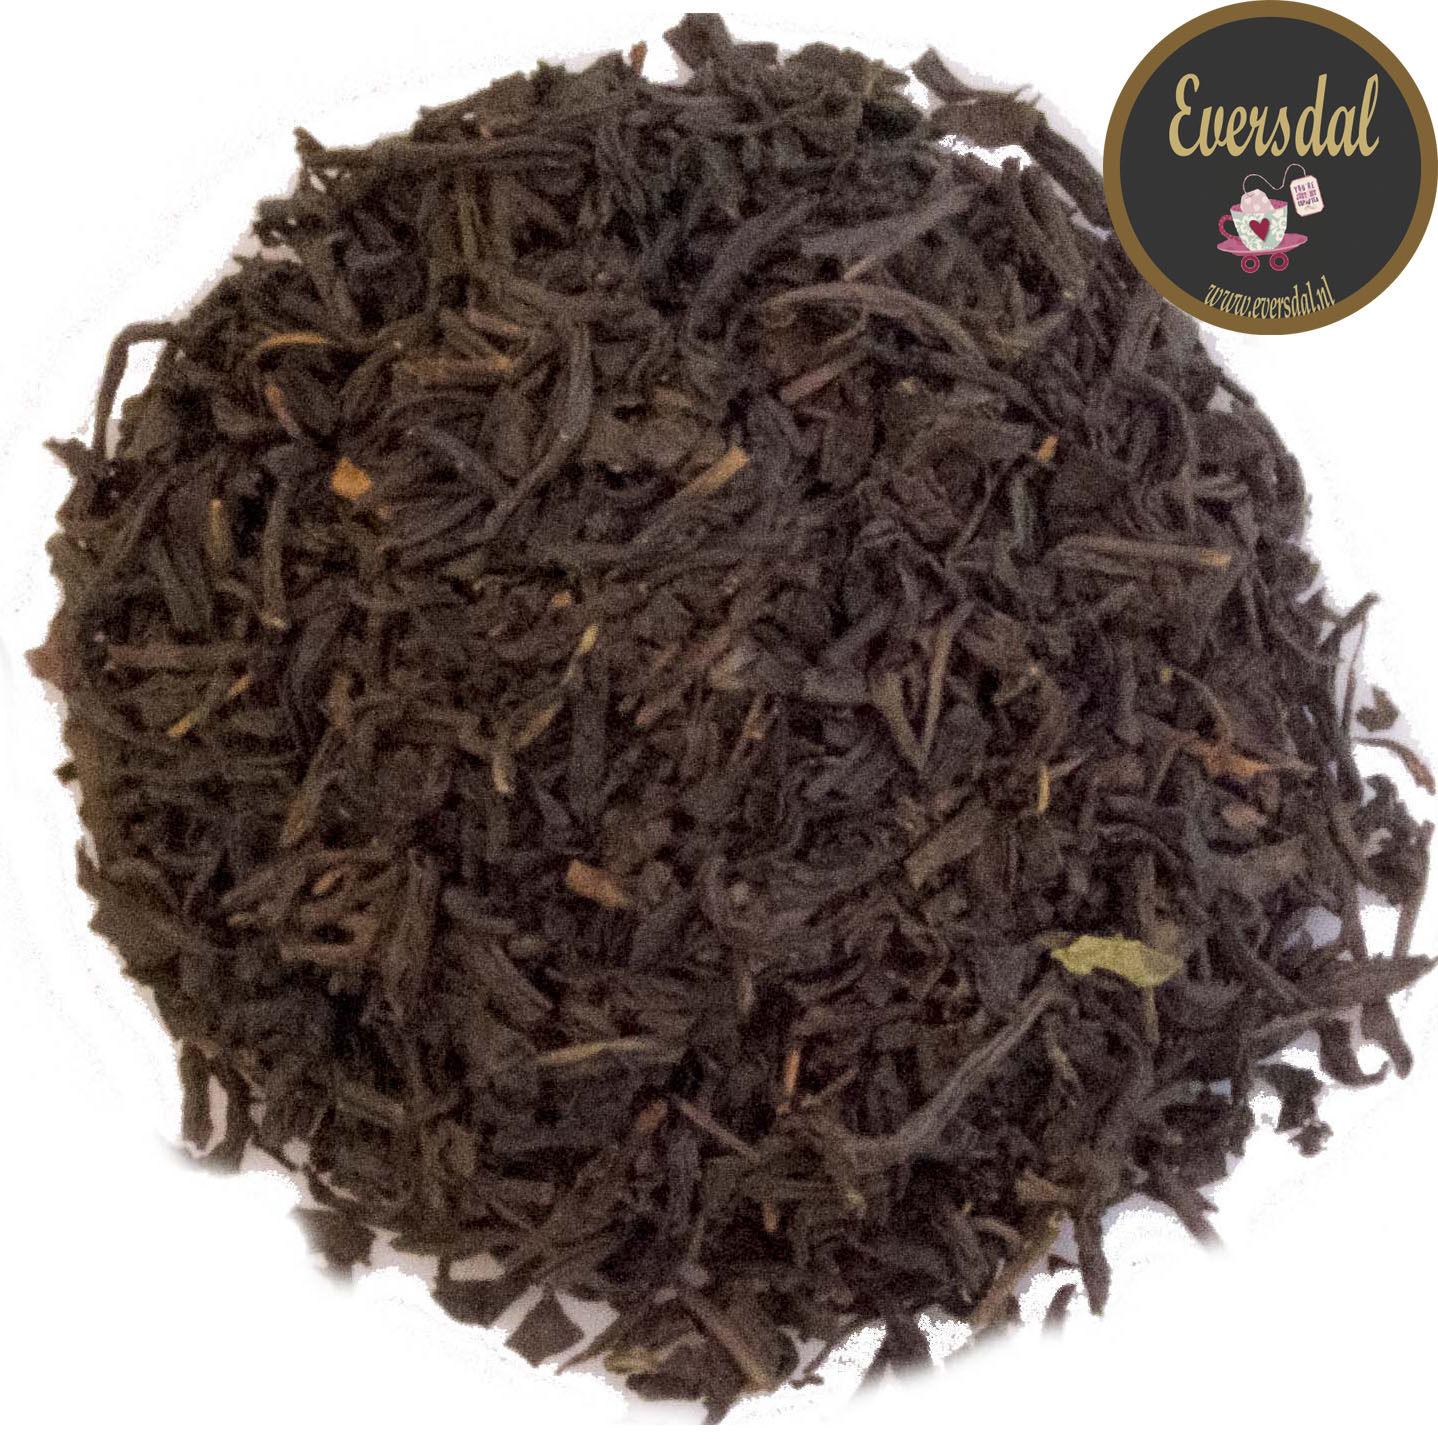 Lapsang Souchong- zwarte gerookte thee